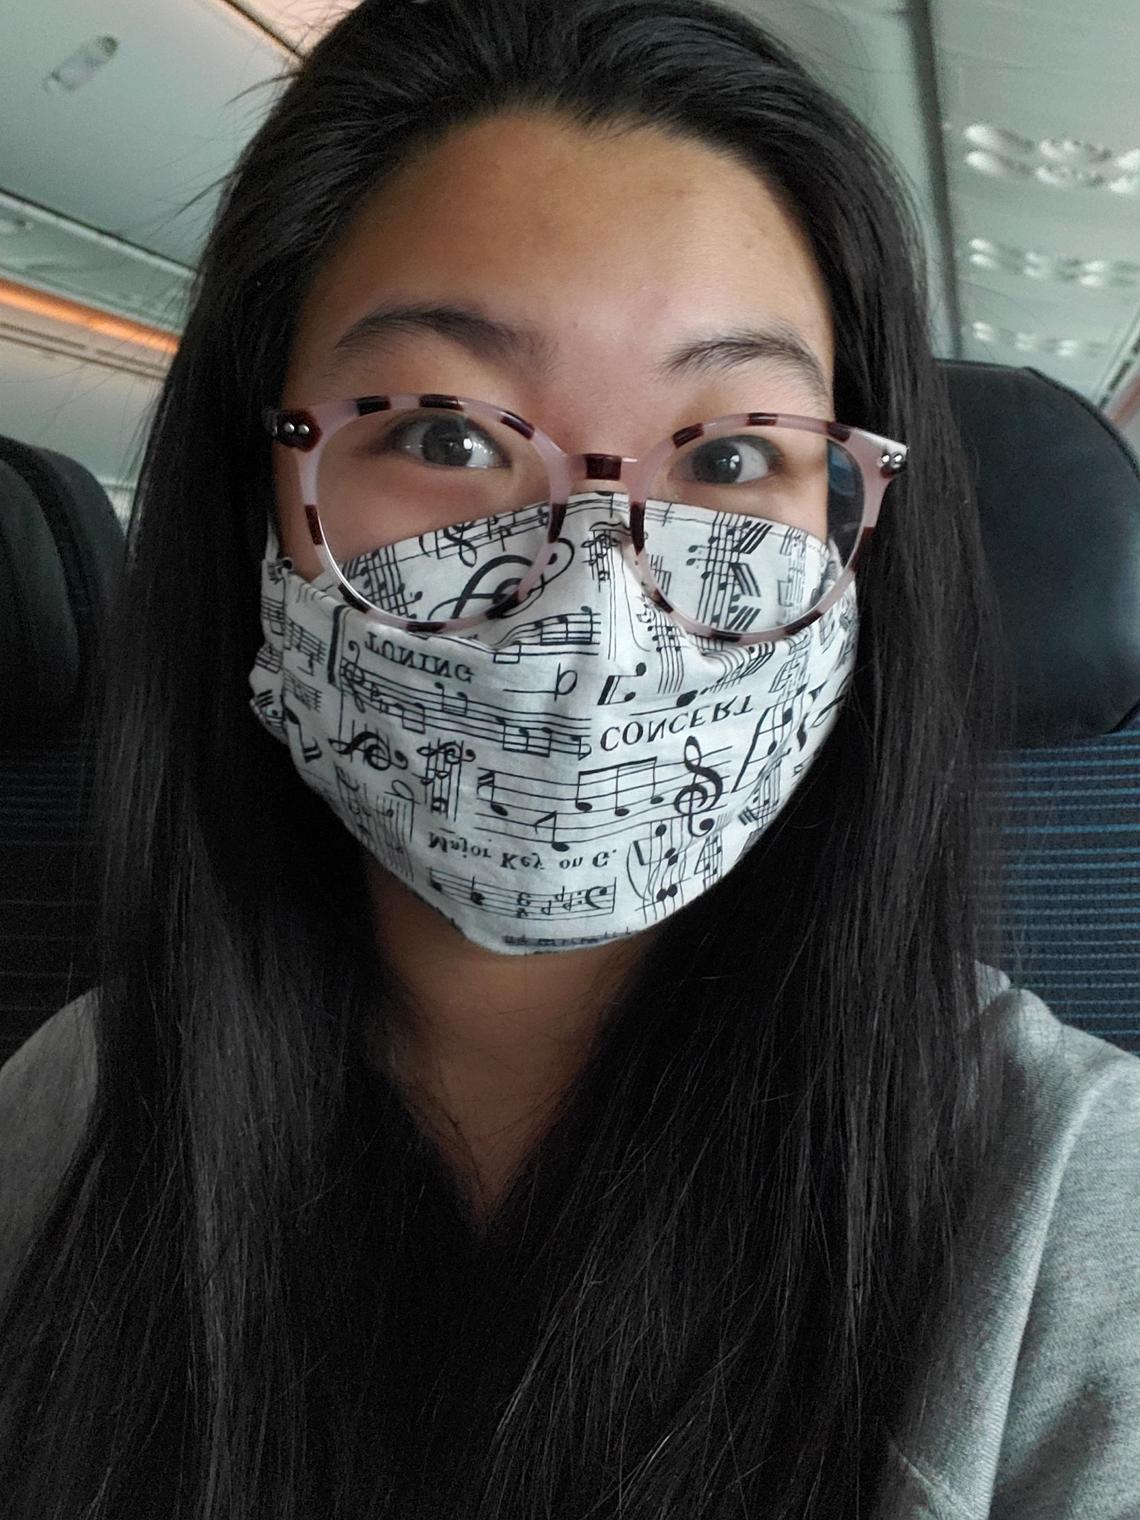 Cheung wearing a music-themed pandemic mask during February this year, the month she spent three weeks in a quarantine hotel in Hong Kong. The photo was taken on one of her flights. 